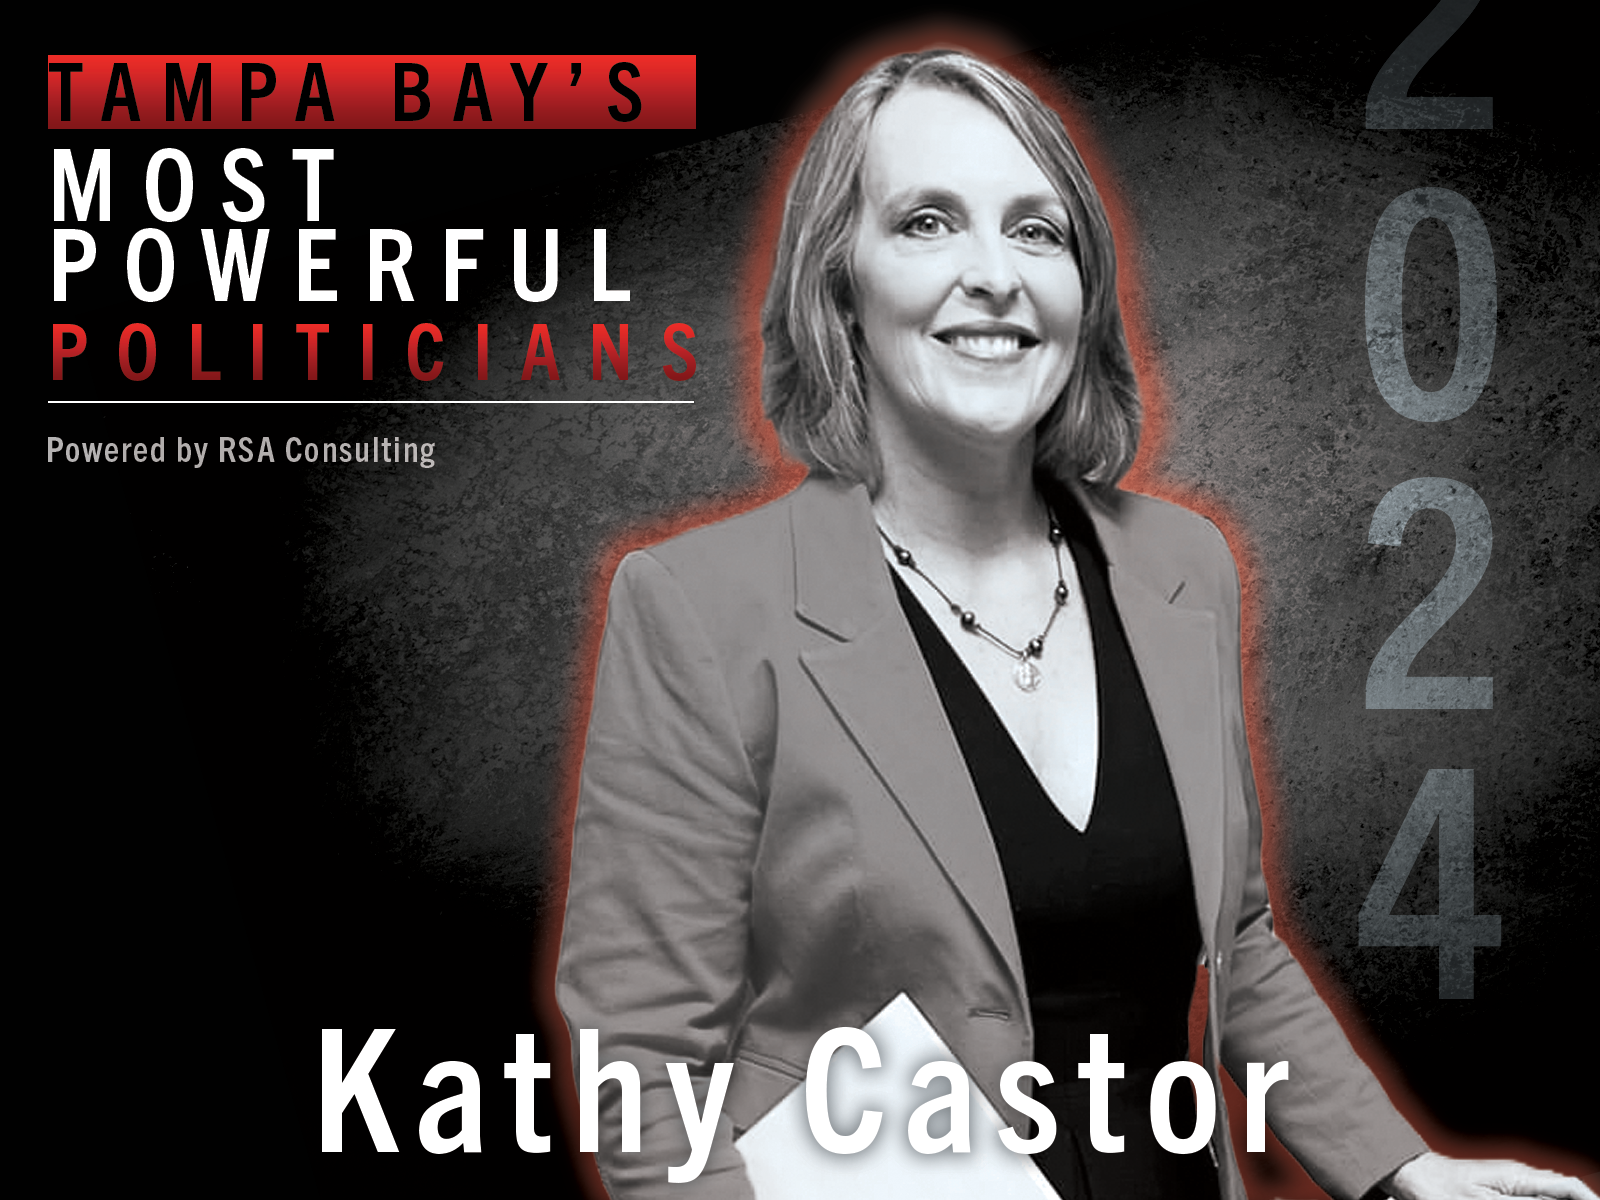  No. 5 on the list of Tampa Bay’s Most Powerful Politicians: Kathy Castor 